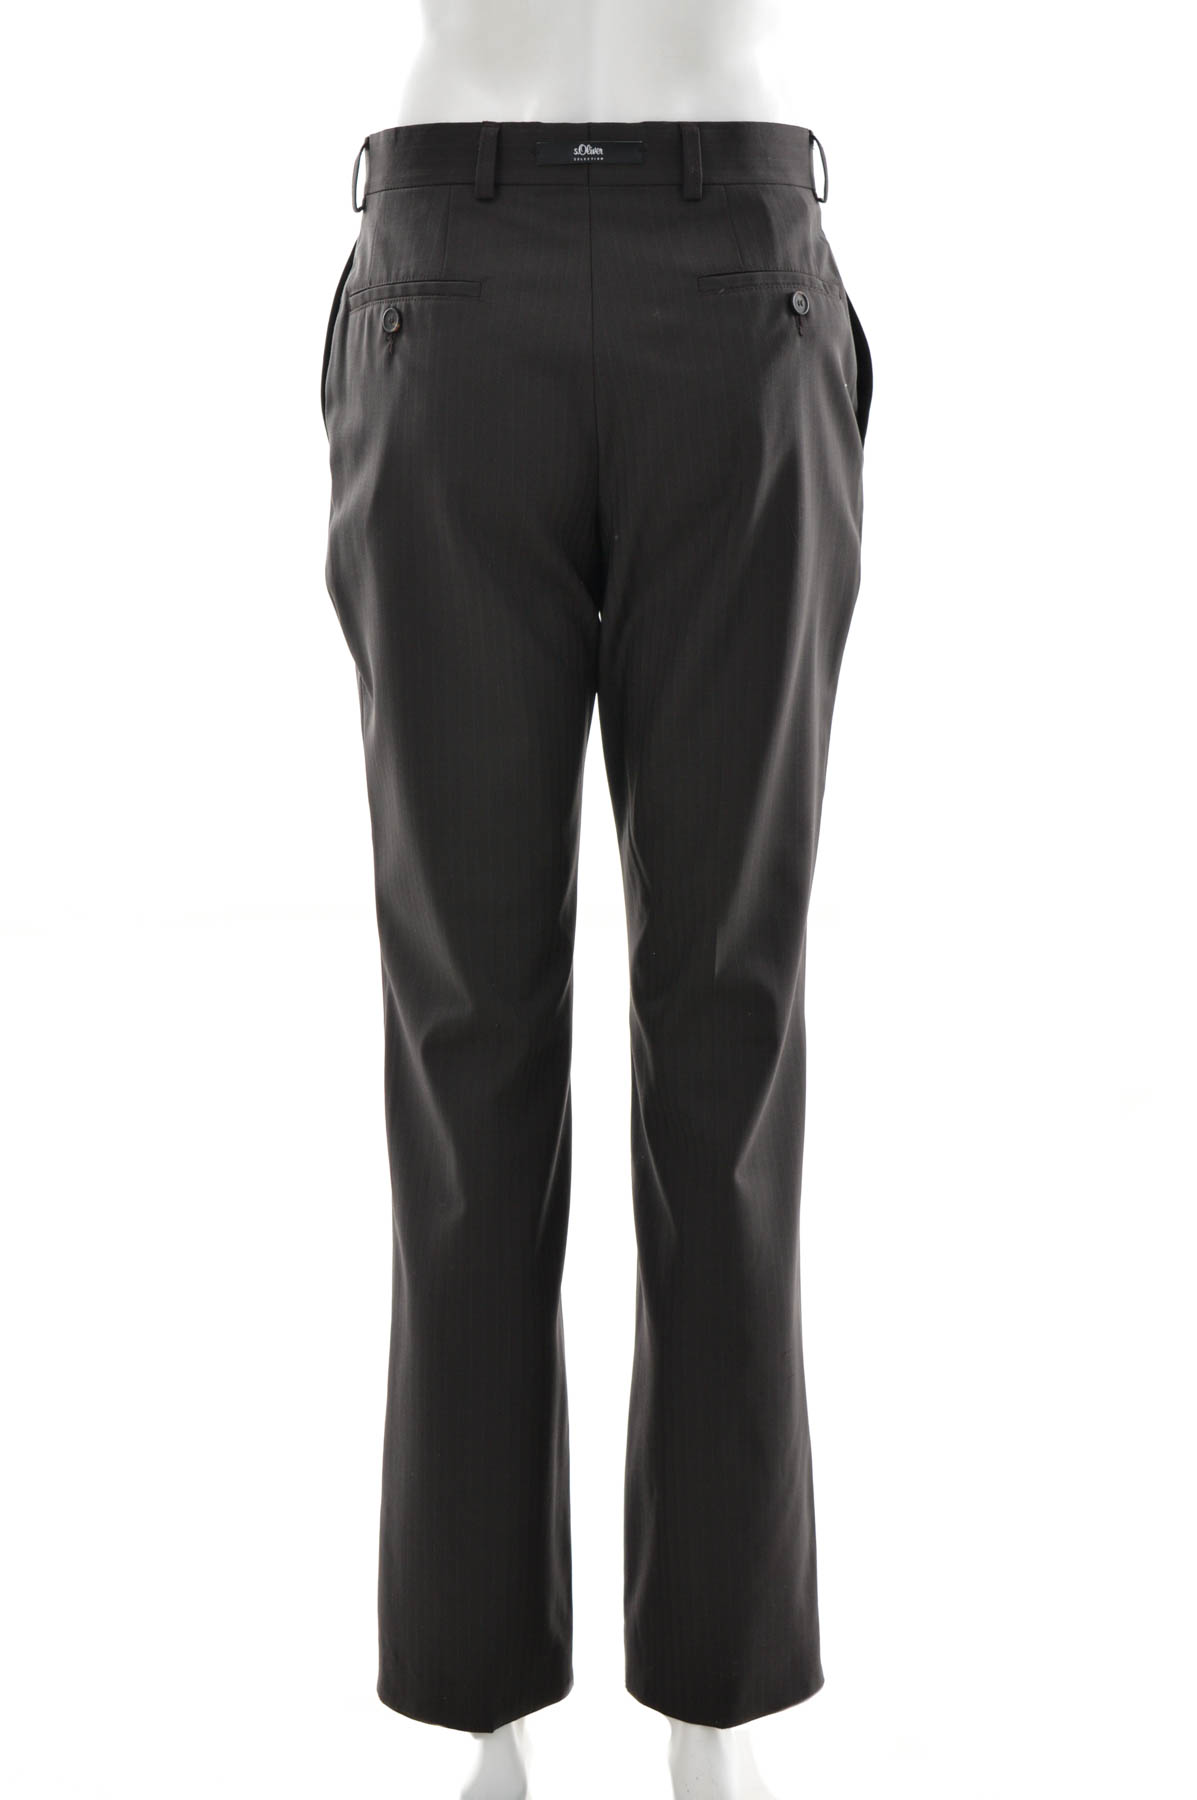 Men's trousers by S.Oliver | Dressyou